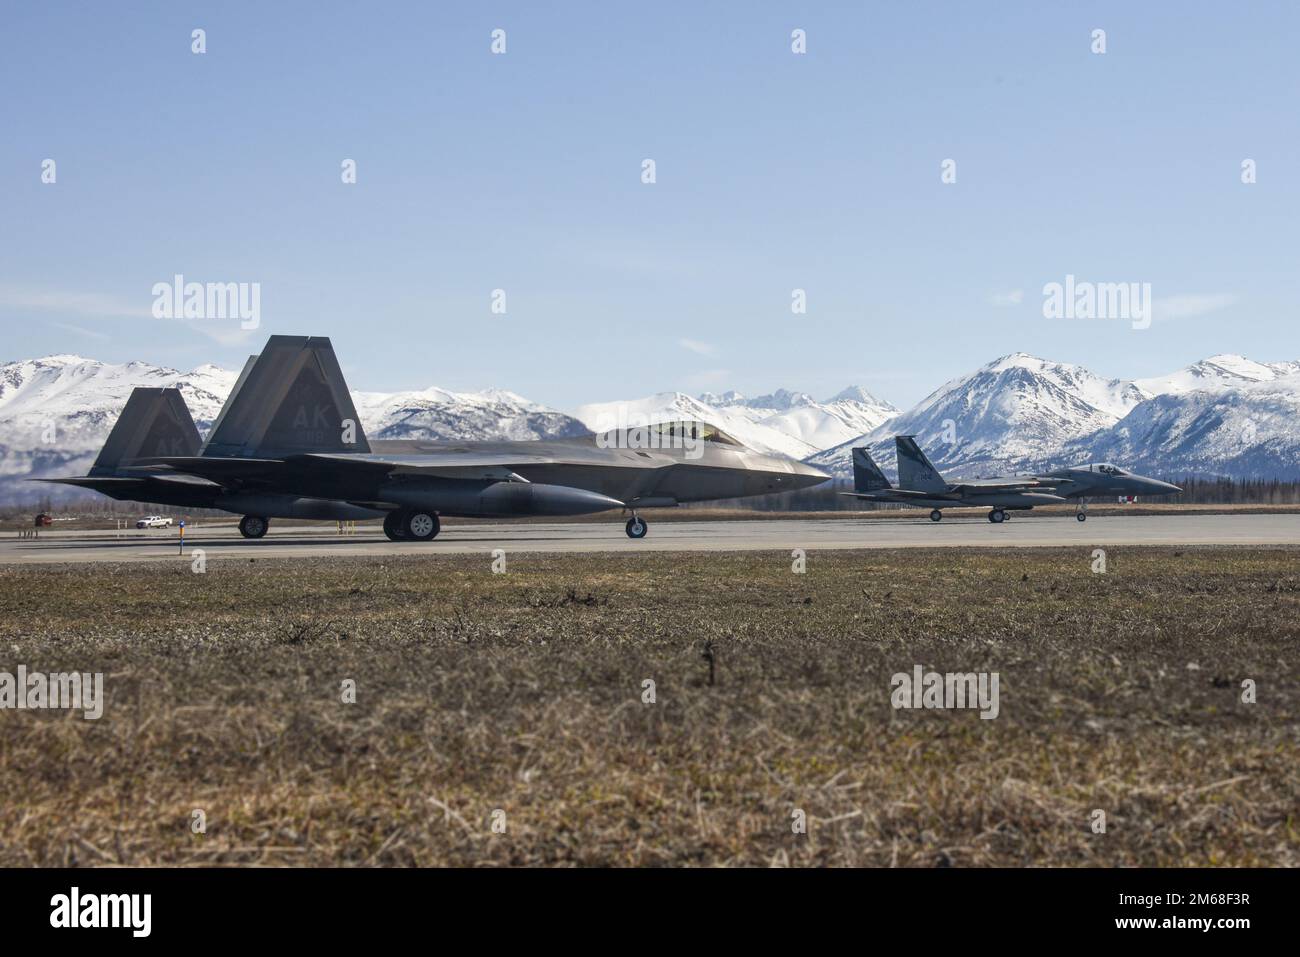 Two F-15C Eagles from the 144th Fighter Wing and two F-22 Raptors from the 3rd Fighter Wing prepare to take off from Joint Base Elmendorf-Richardson, Alaska, April 18, 2022, during an Aerospae Control Alert training scramble. It has been almost a decade since F-15 Eagles have sat alert in the region, protecting the airspace of the United States and Canada. The overall alert mission and corresponding training missions at JBER focused on fighter integration between fourth-generation F-15 Eagles and fifth-generation F-22 Raptors and their ability to interoperate seamlessly. Stock Photo